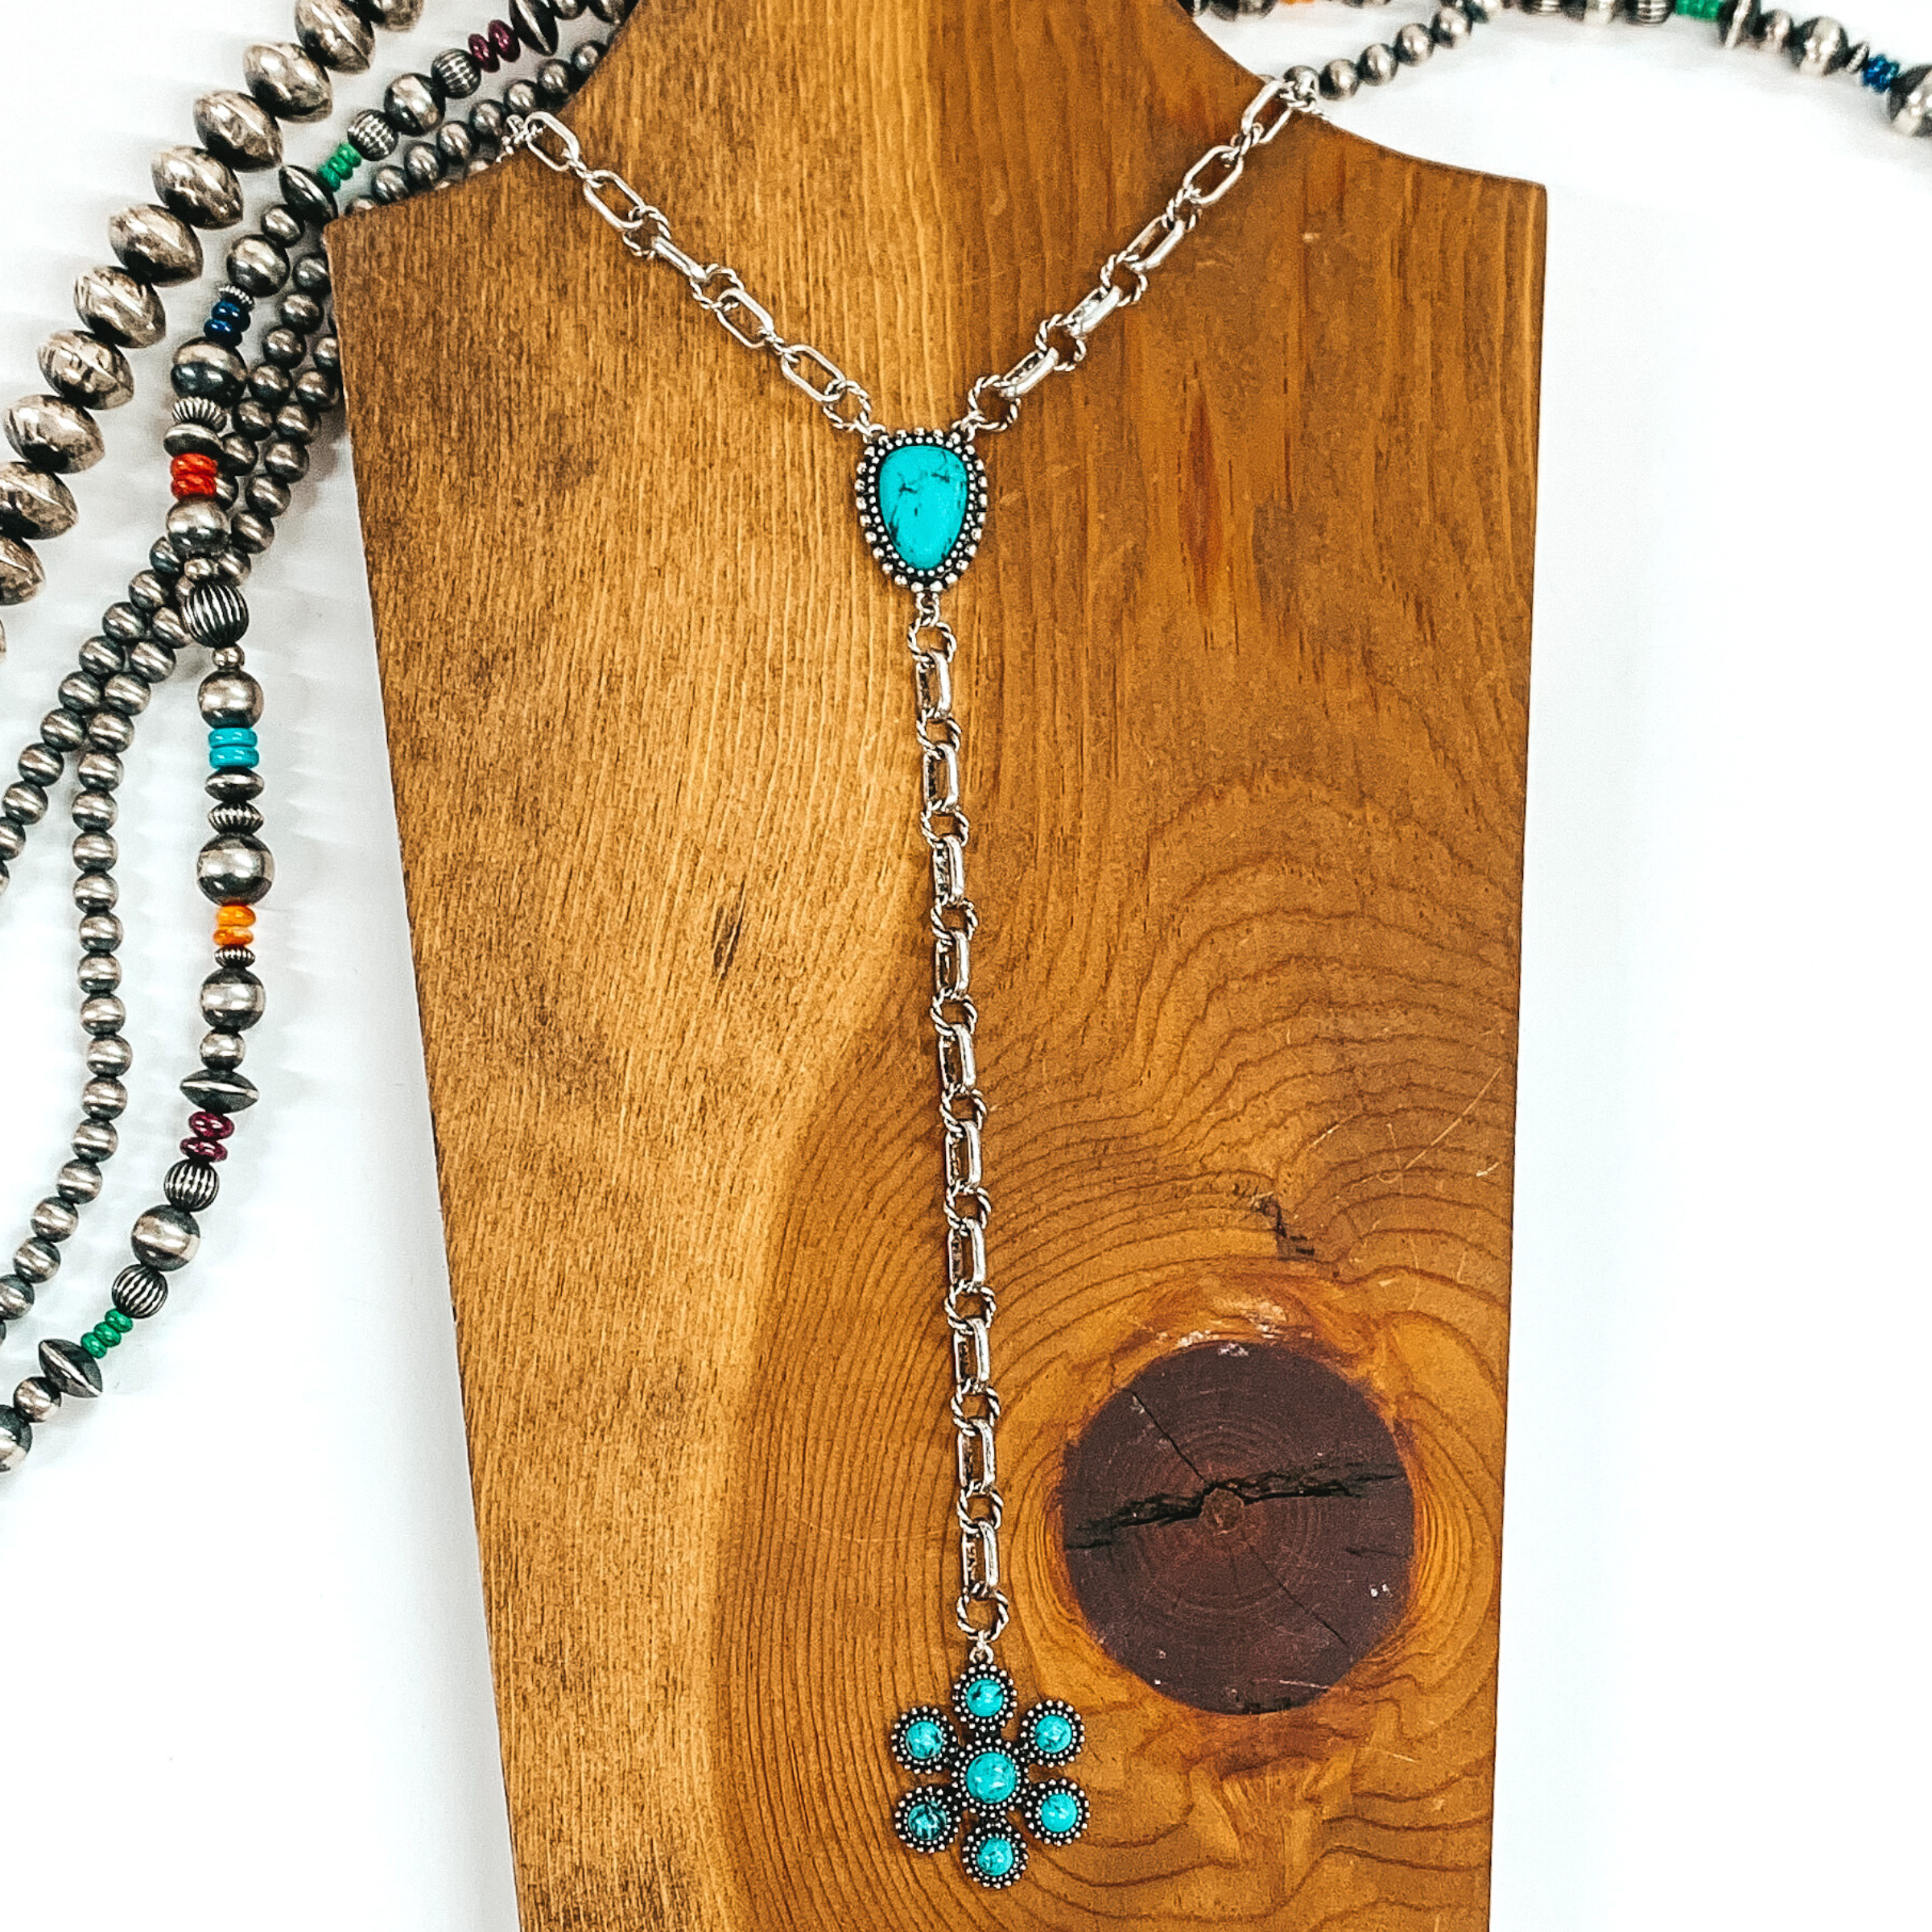 Silver chained necklace that is Navajo inspired with a turquoise irregular stoned pendant. Then hanging from the pendant, there is a hanging silver chain with a star burst pendant with turquoise stones. This necklace is pictured on  wood necklace holder on a white background. It has different shaped and colored Navajo strands. 